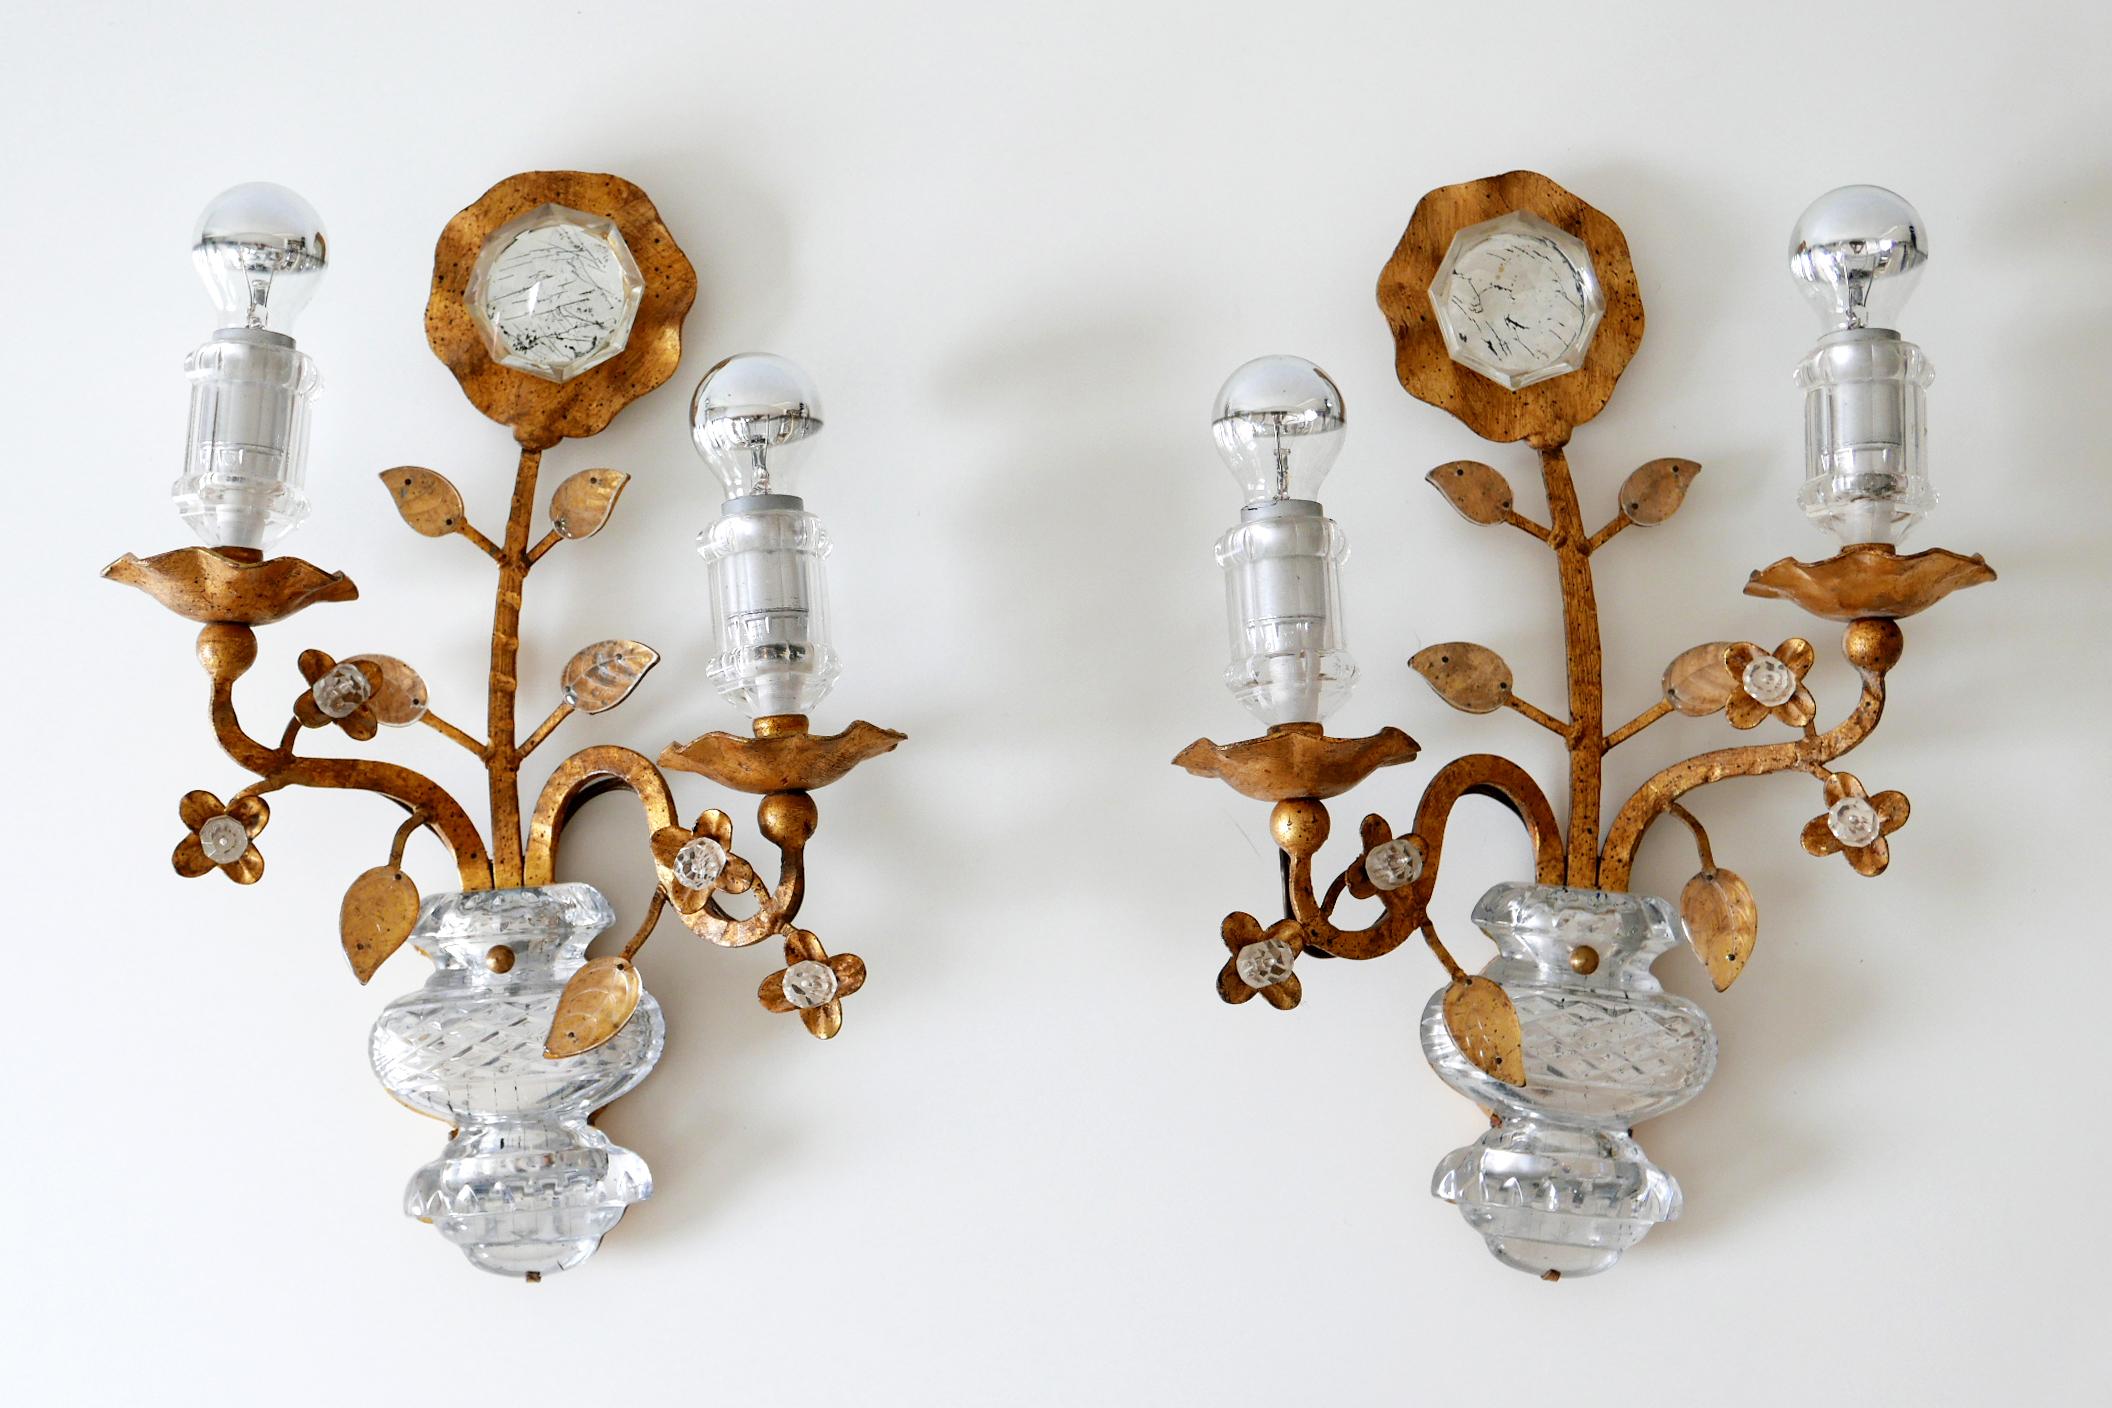 Set of two highly decorative and beautiful Mid-Century Modern crystal and gilt metal sconces or wall lamps. Manufactured by Maison Baguès, 1960s, France.

Executed in gilt metal and crystal glass, each lamp needs 2 x E14 / E12 Edison screw fit